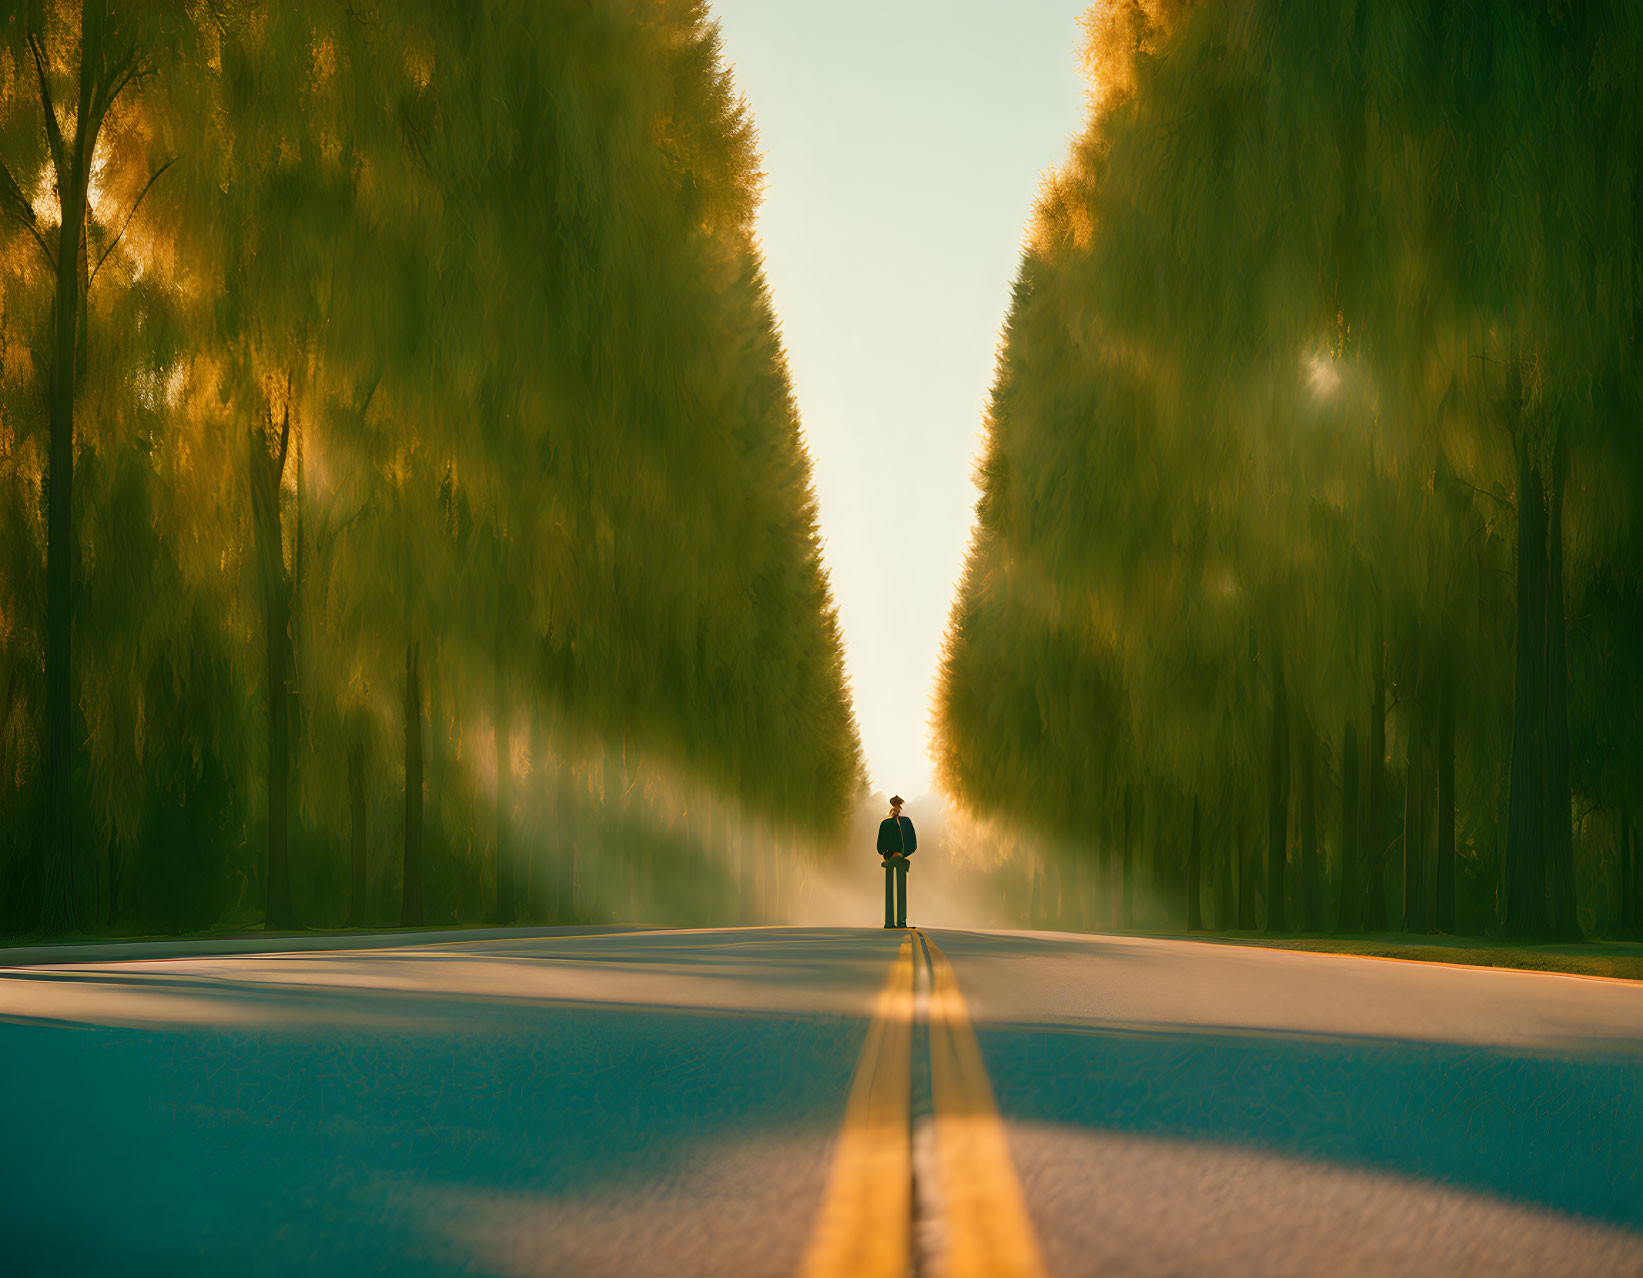 Solitary figure on deserted road with tall trees at sunrise or sunset